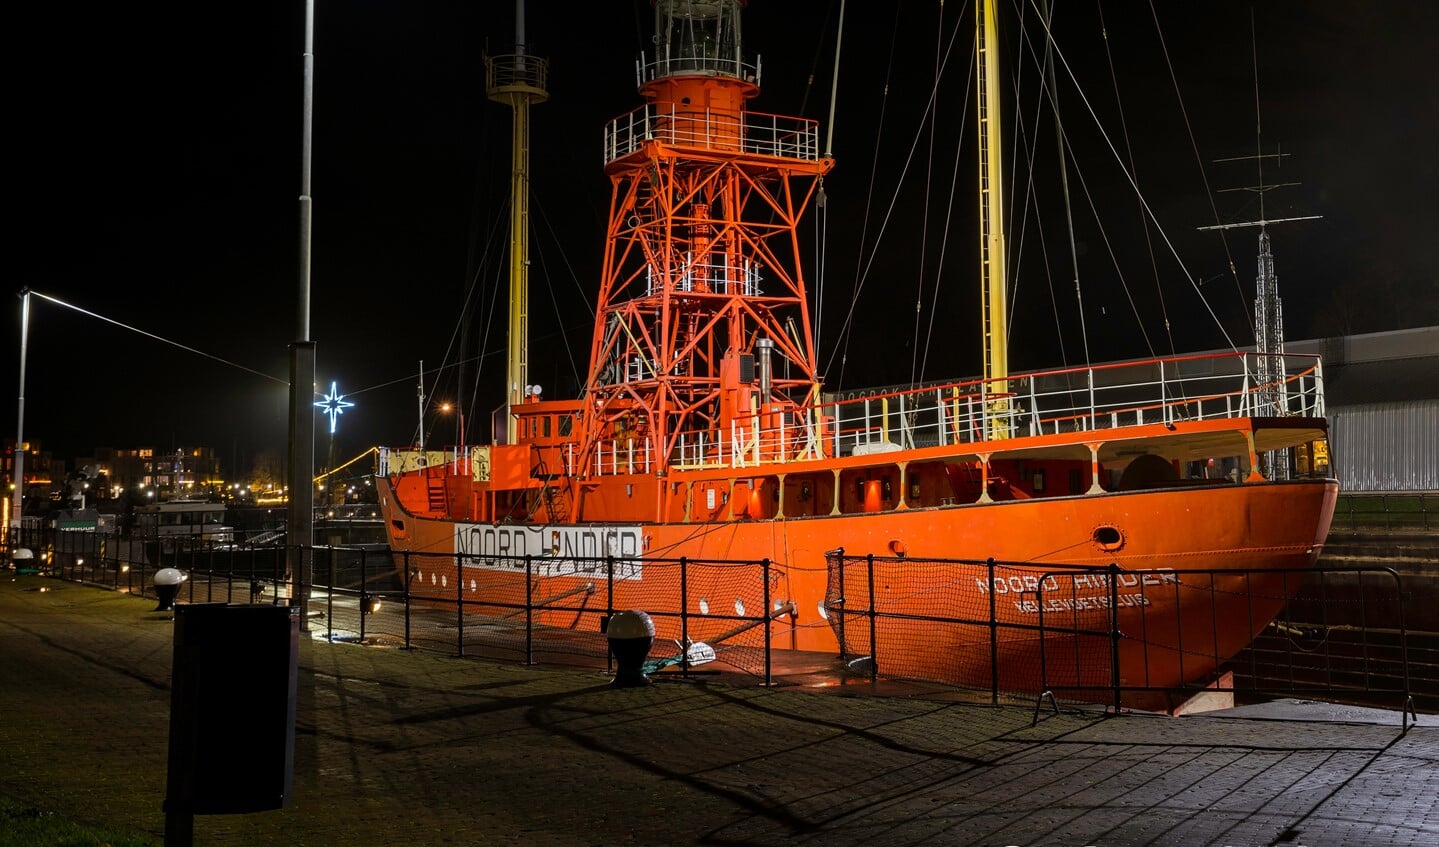 Hellevoetlsuis,Holland,9-dec-2021:the noordhinder is the last lightship built in the Netherlands. The ship was built in 1963 and is located in the only working dry dock in the Netherlands